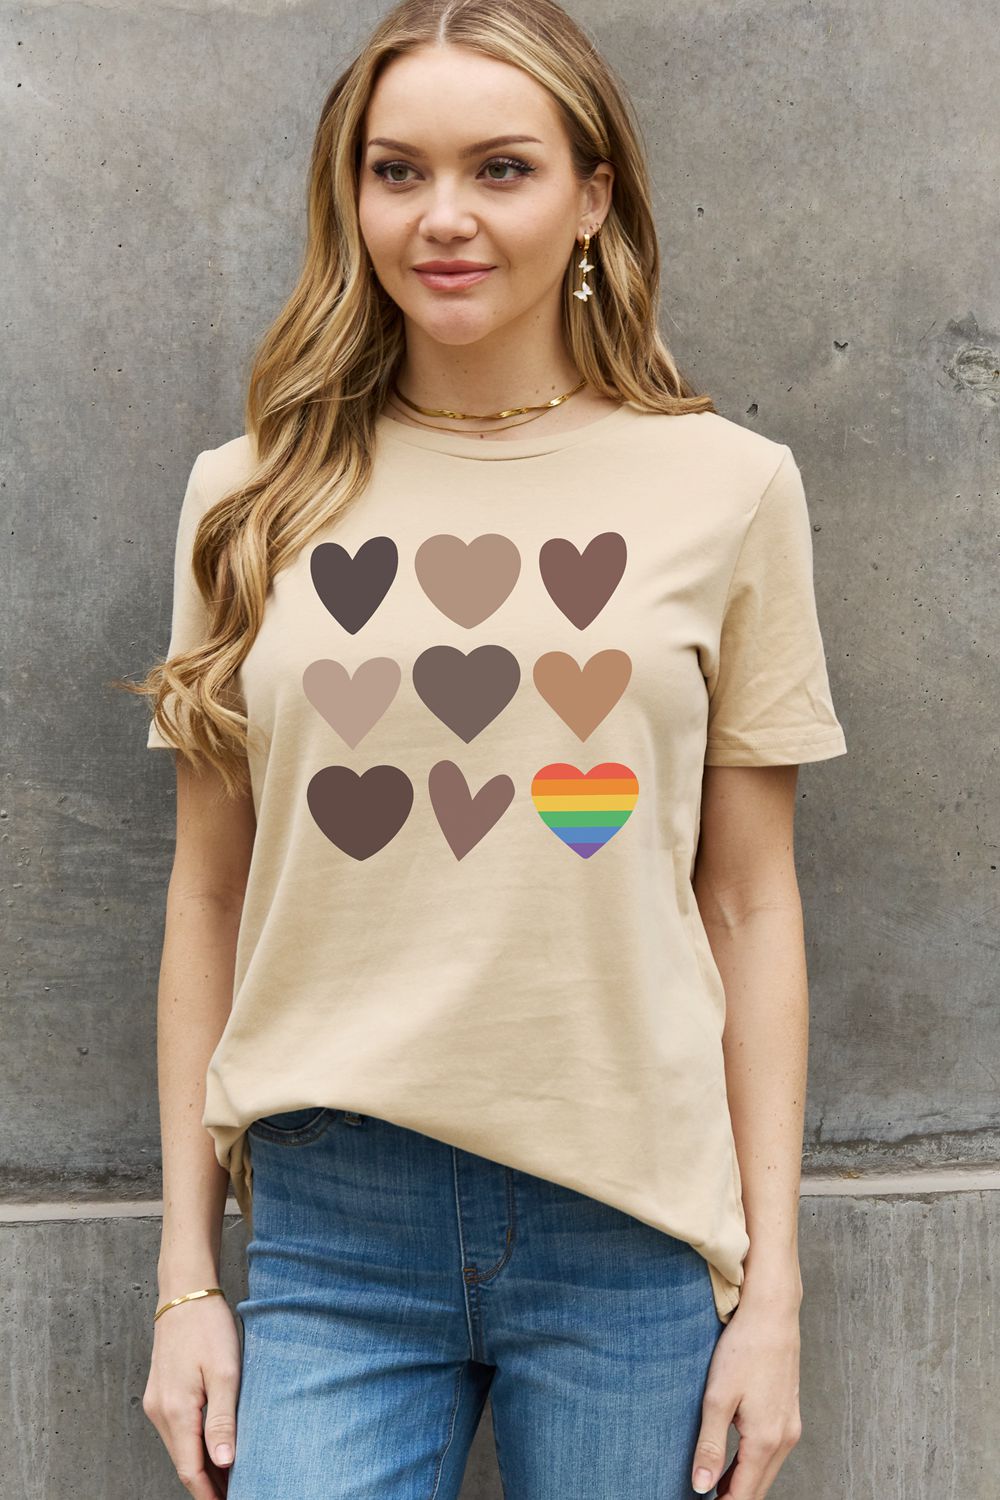 Rosy Brown Simply Love Full Size Heart Graphic Cotton Tee Sentient Beauty Fashions Apparel &amp; Accessories